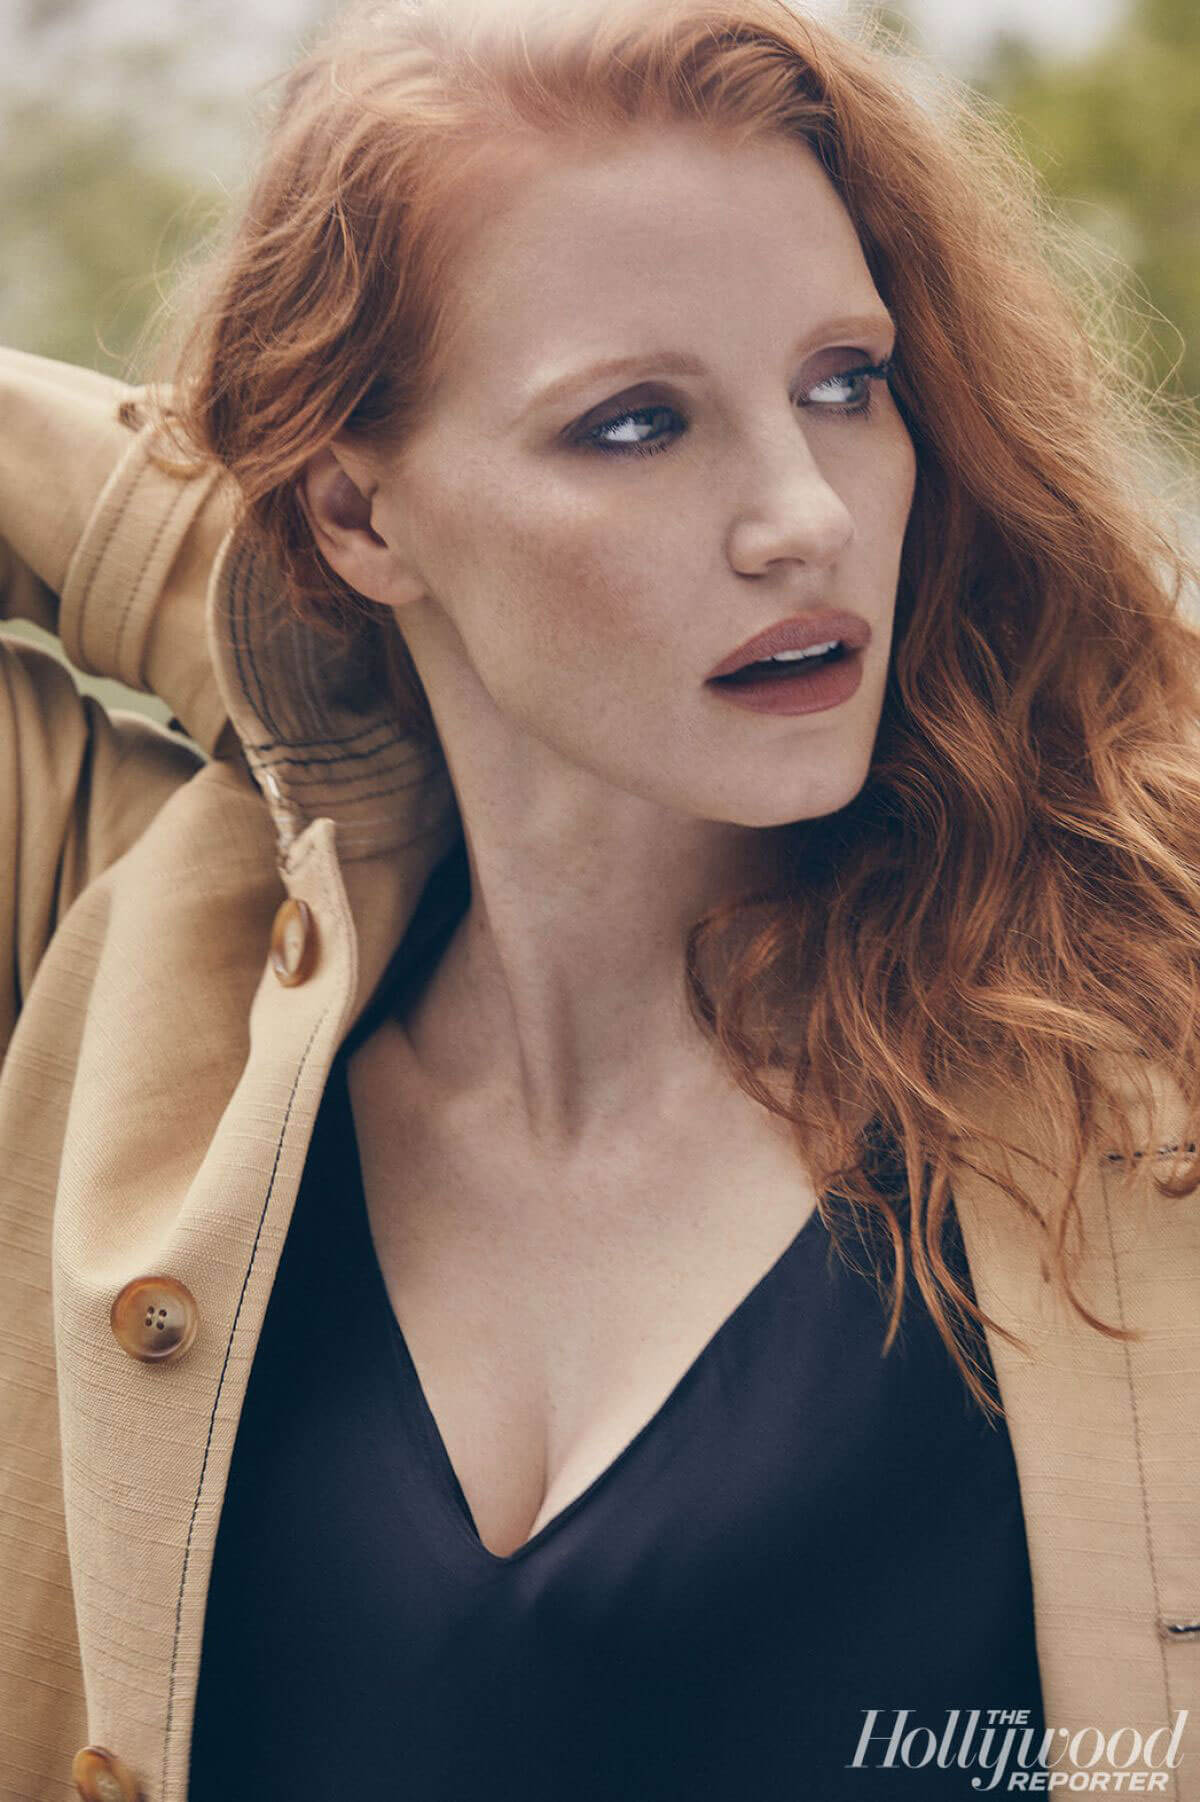 Jessica Chastain in The Hollywood Reporter, June 2018 Issue